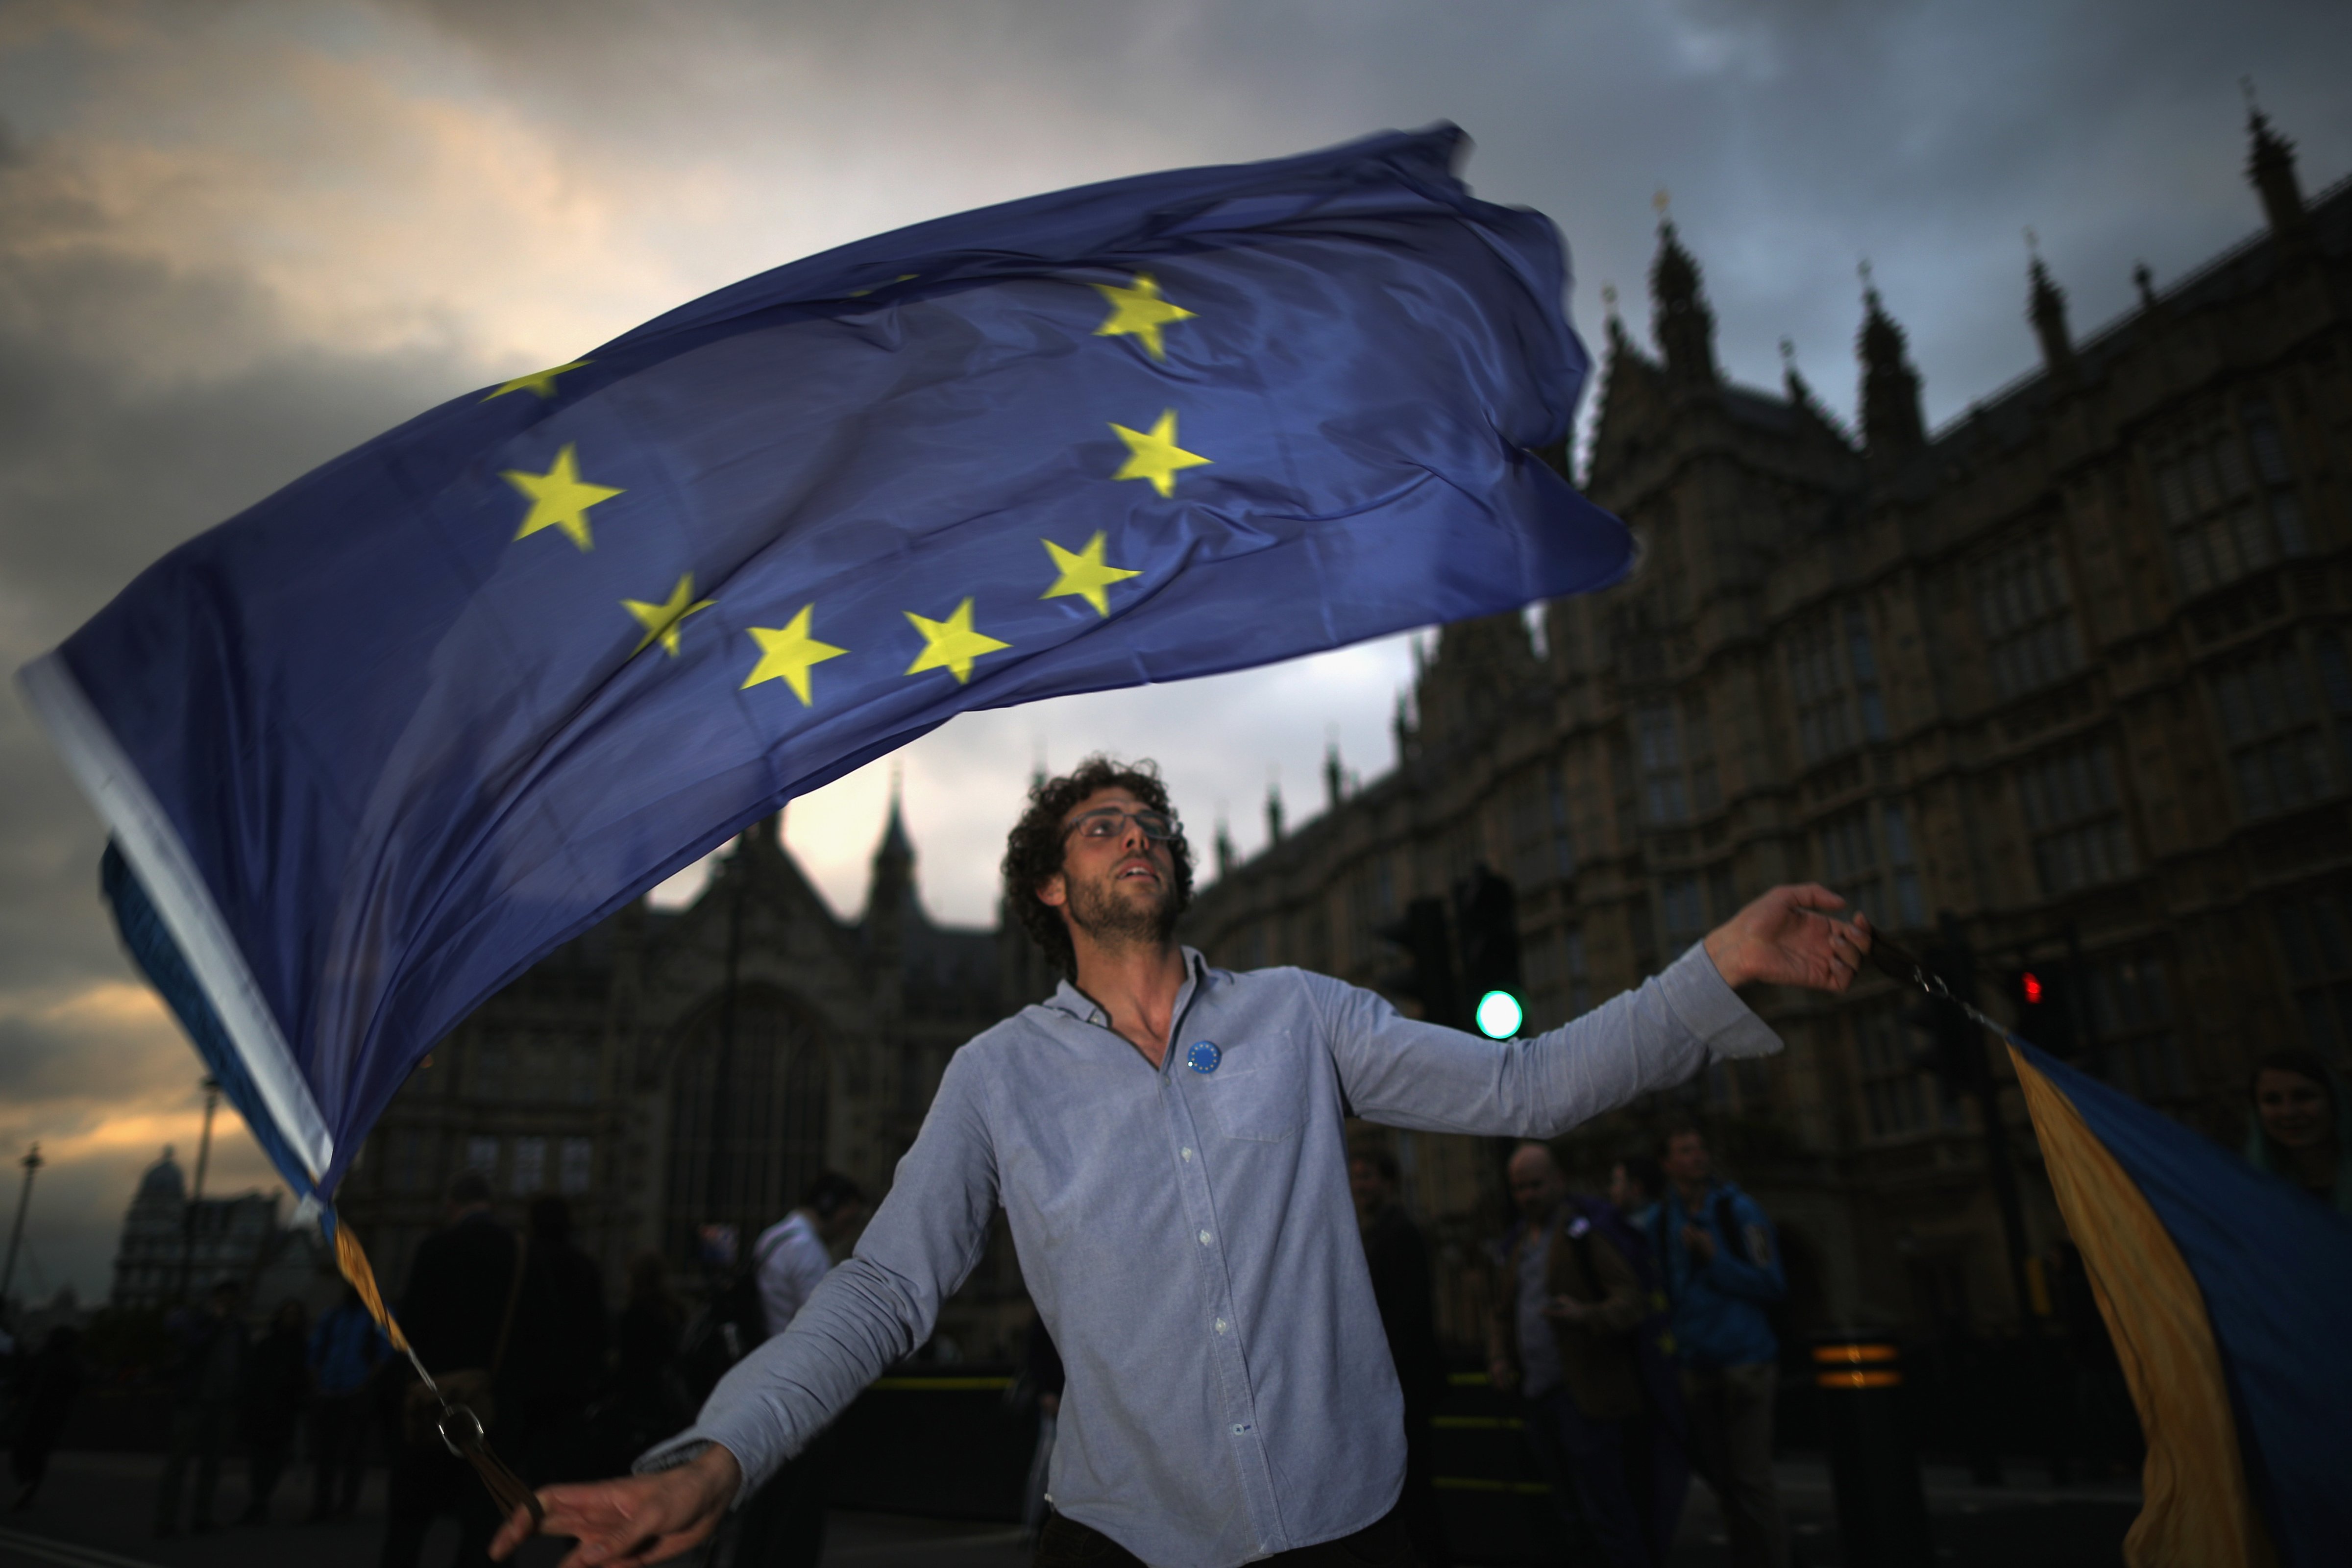 A protester waves an EU flag in front of the Houses of Parliament as they demonstrate against the EU referendum result on June 28, 2016 in London, England (Christopher Furlong—Getty Images)